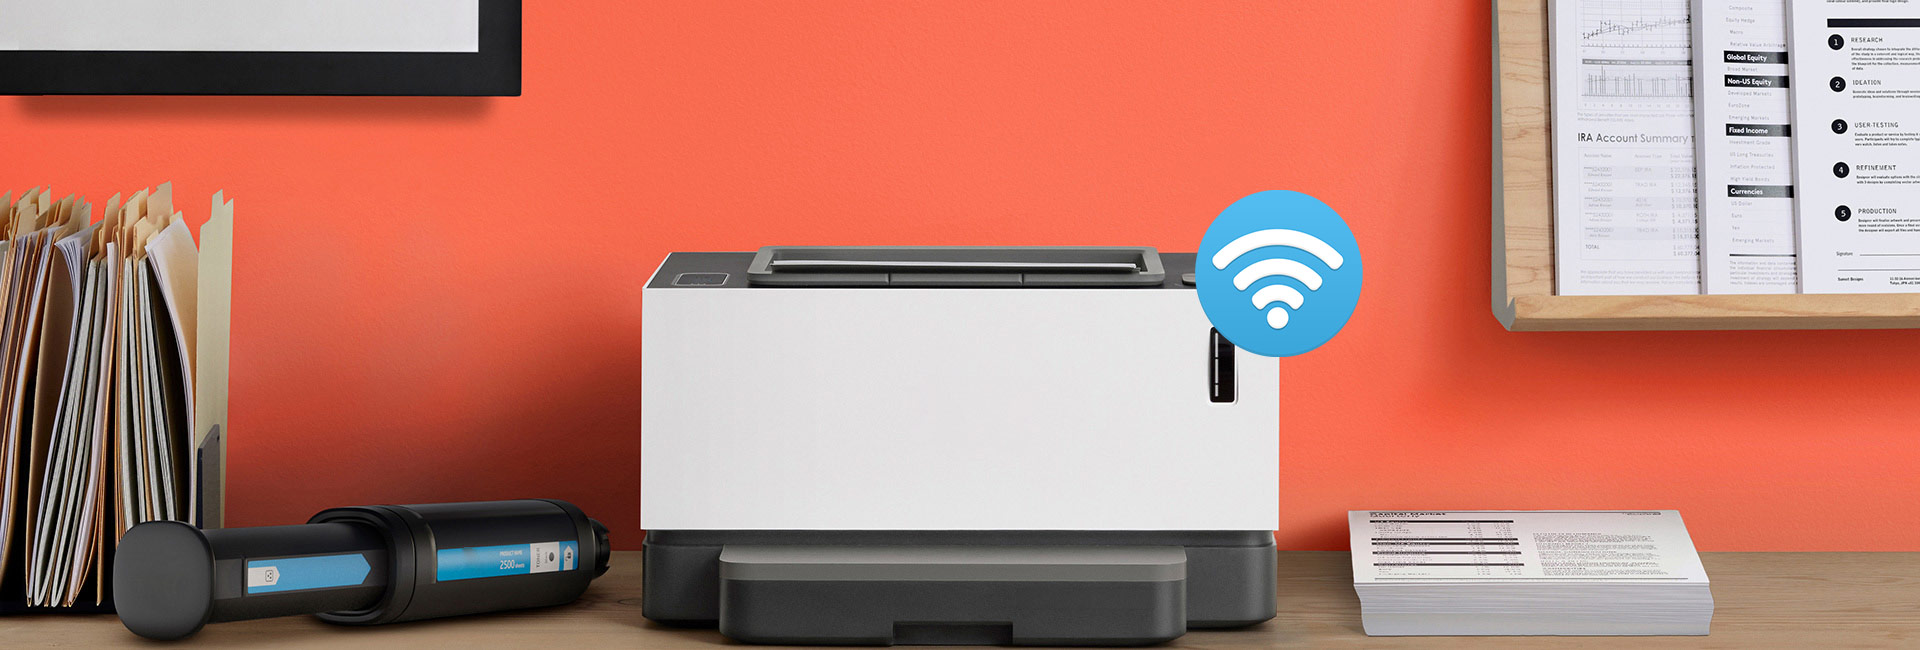 How to Connect HP Printer to New WiFi